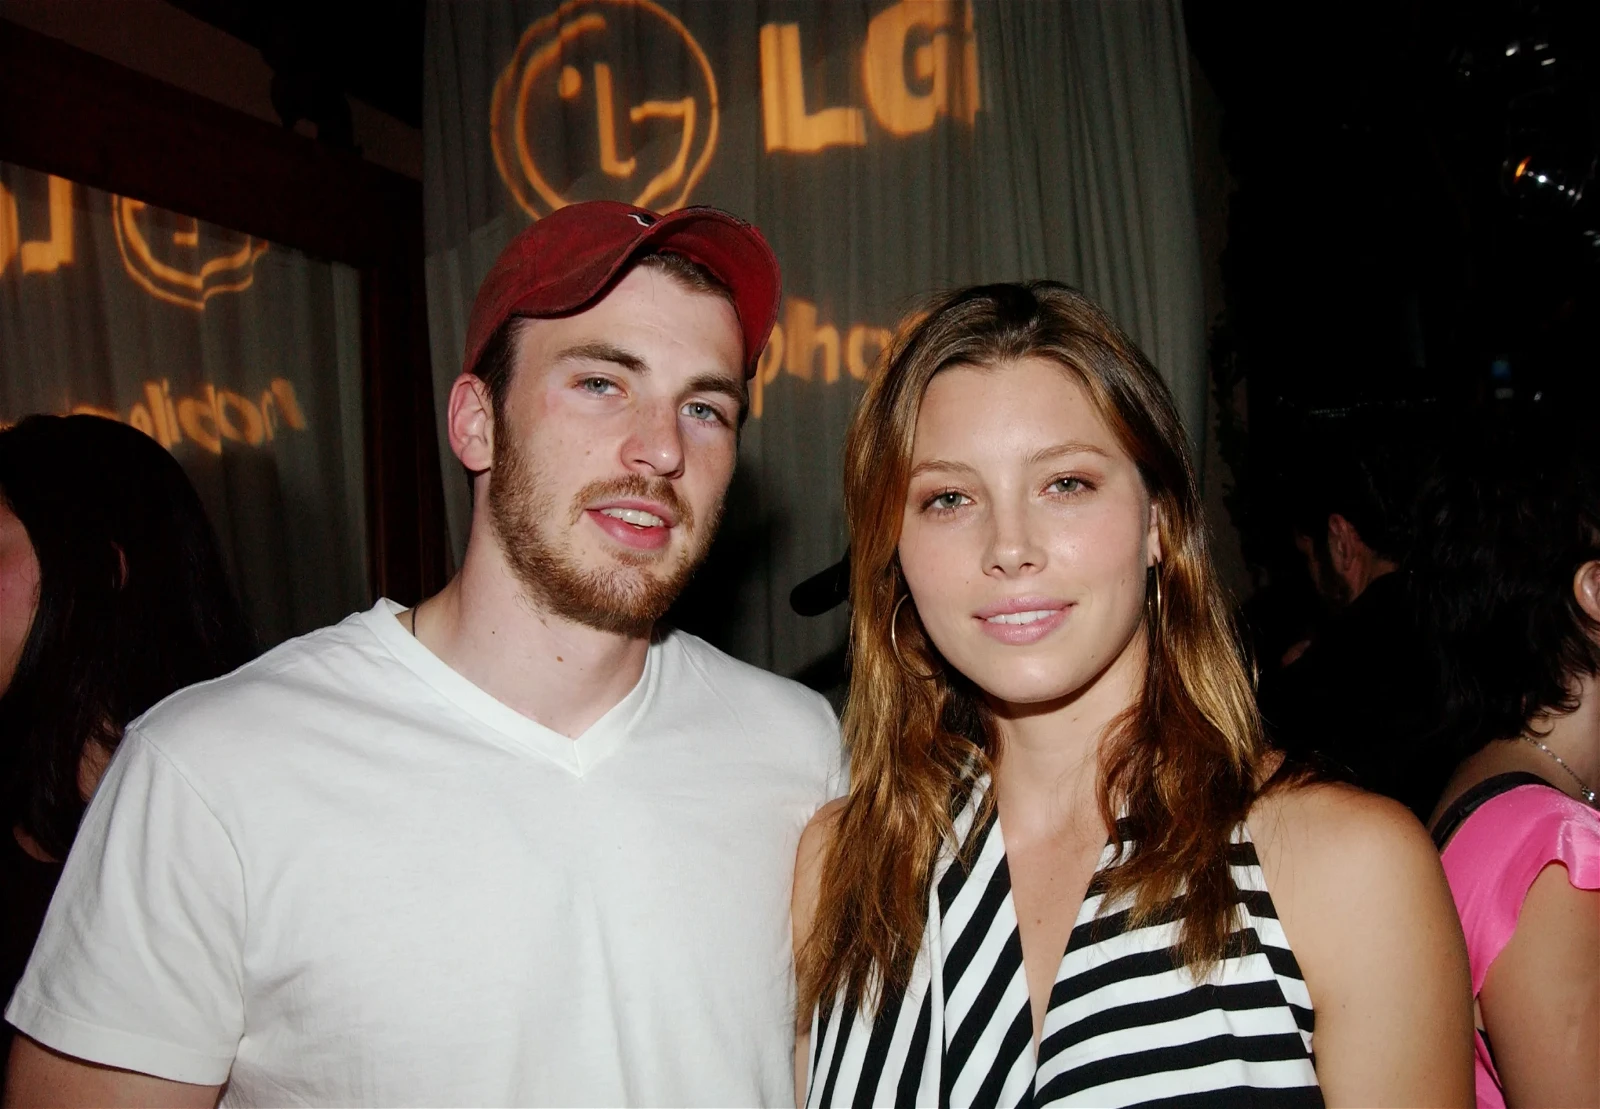 Chris Evans and Jessica Biel dated for 5 years before breaking up.